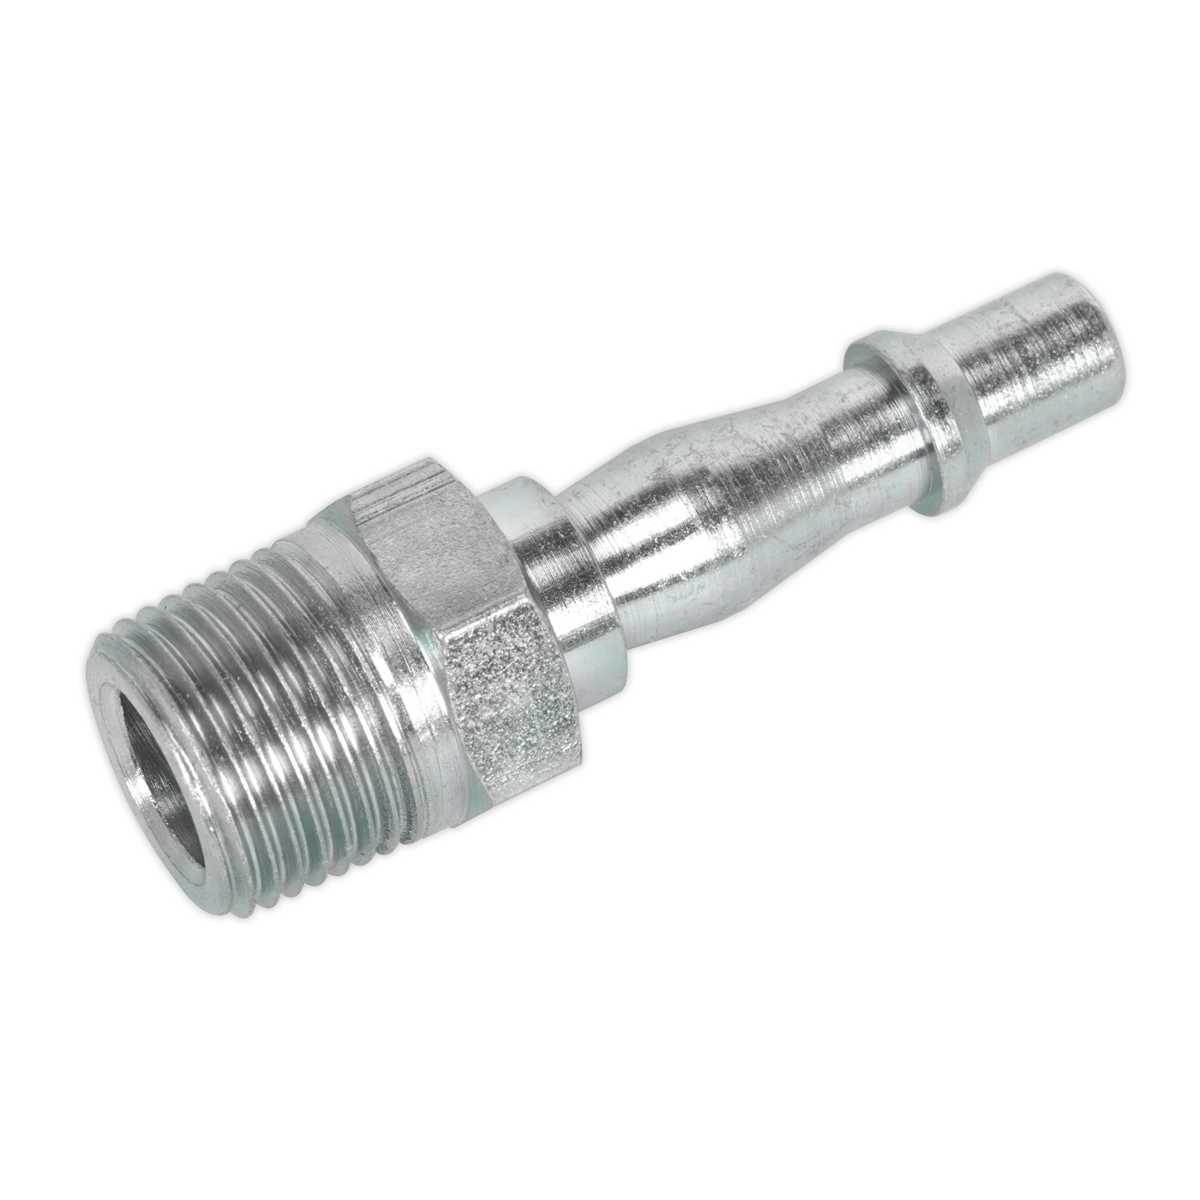 Screwed Adaptor Male 3/8"BSPT Pack of 5 - AC19 - Farming Parts